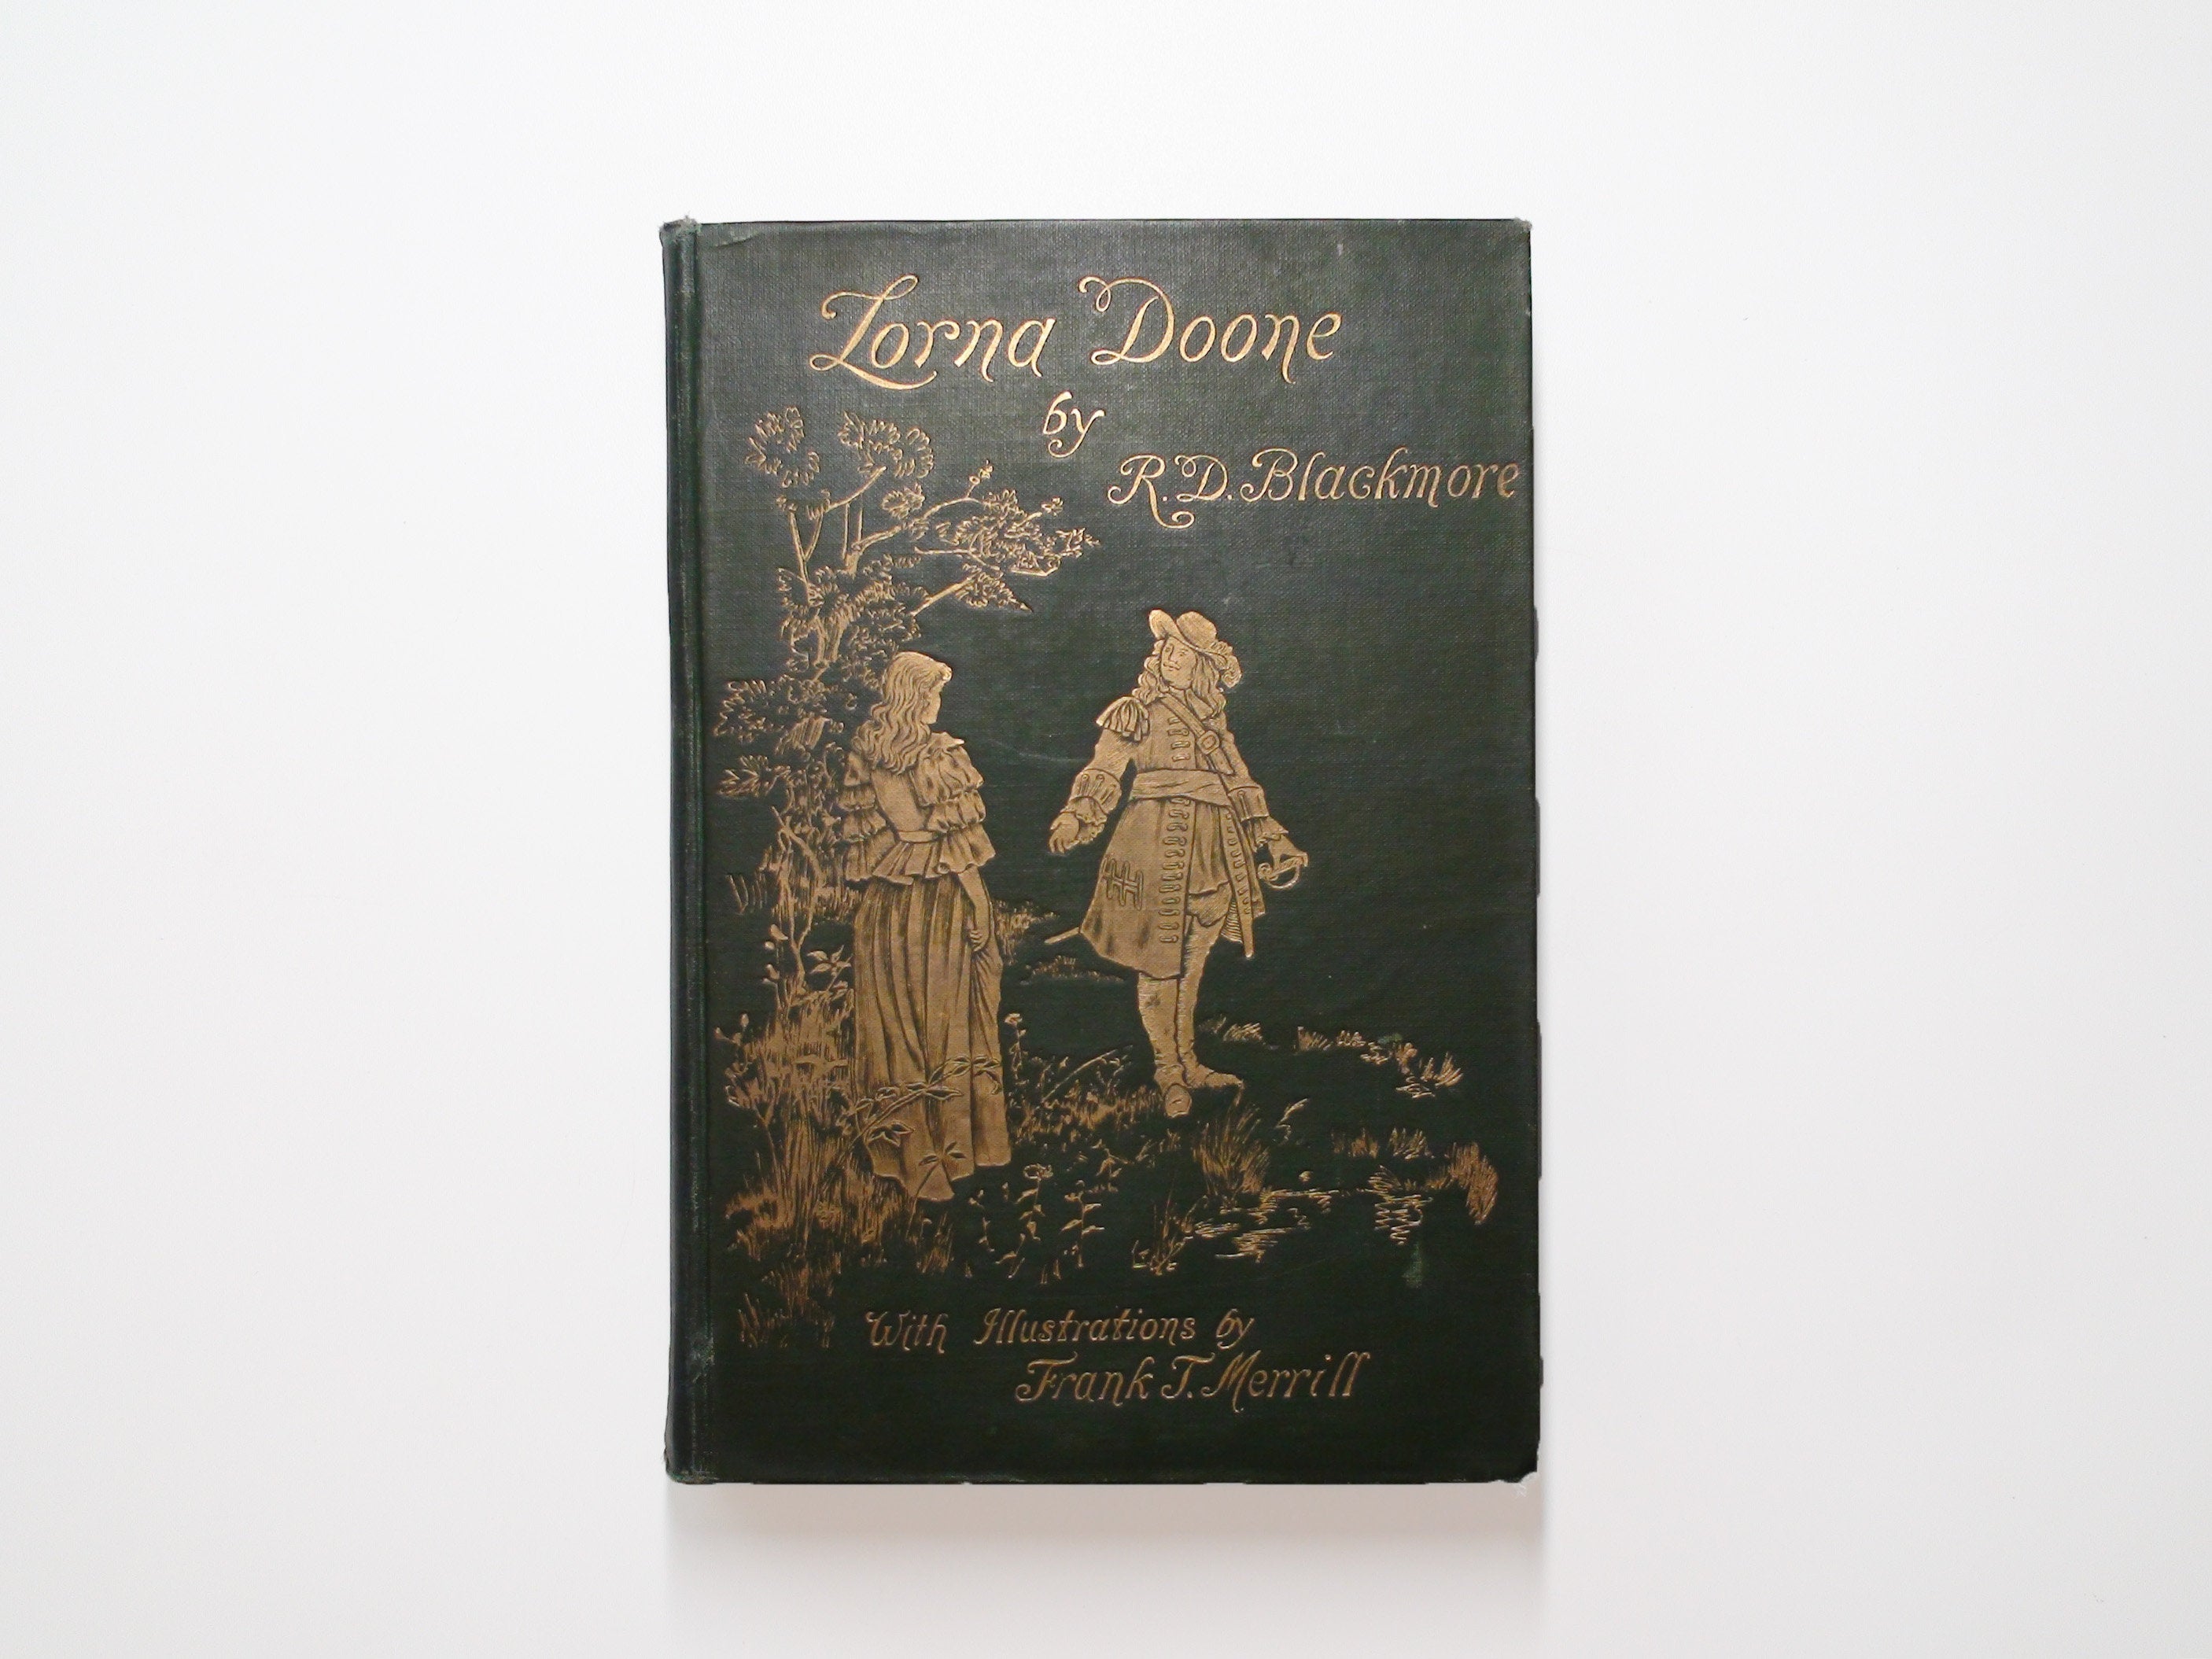 Lorna Doone, R. D. Blackmore, Illustrated by Frank T. Merrill, Vol I Only, 1893